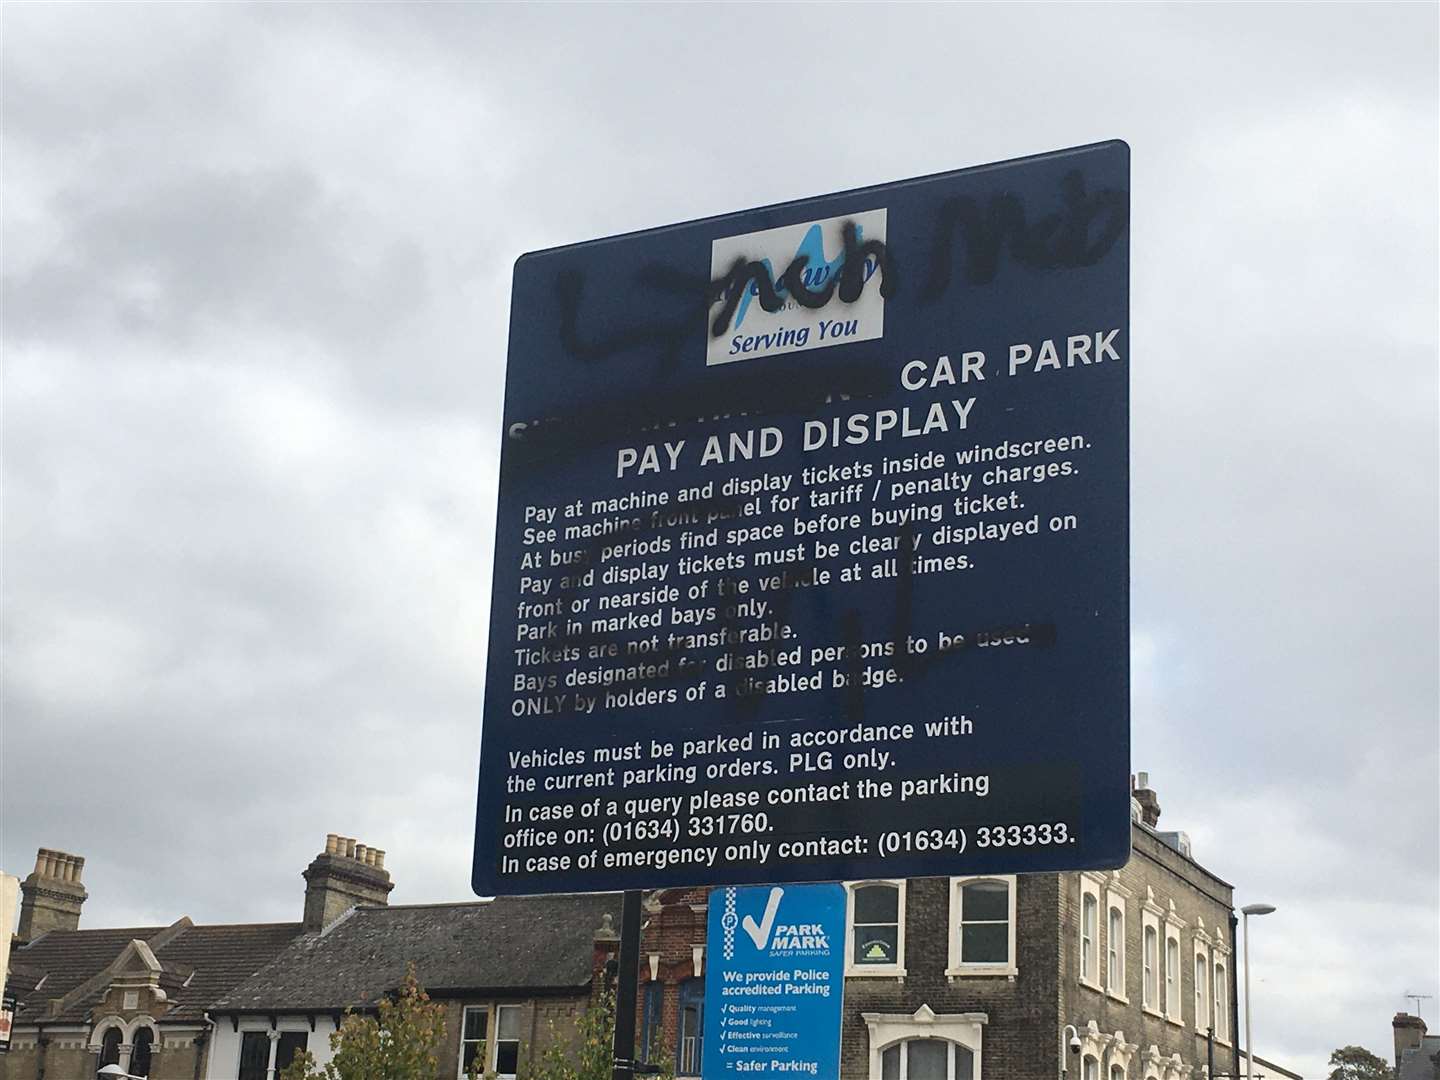 The Sir John Hawkins car park signs in Chatham were scrawled with graffiti in October protesting about the name of the site